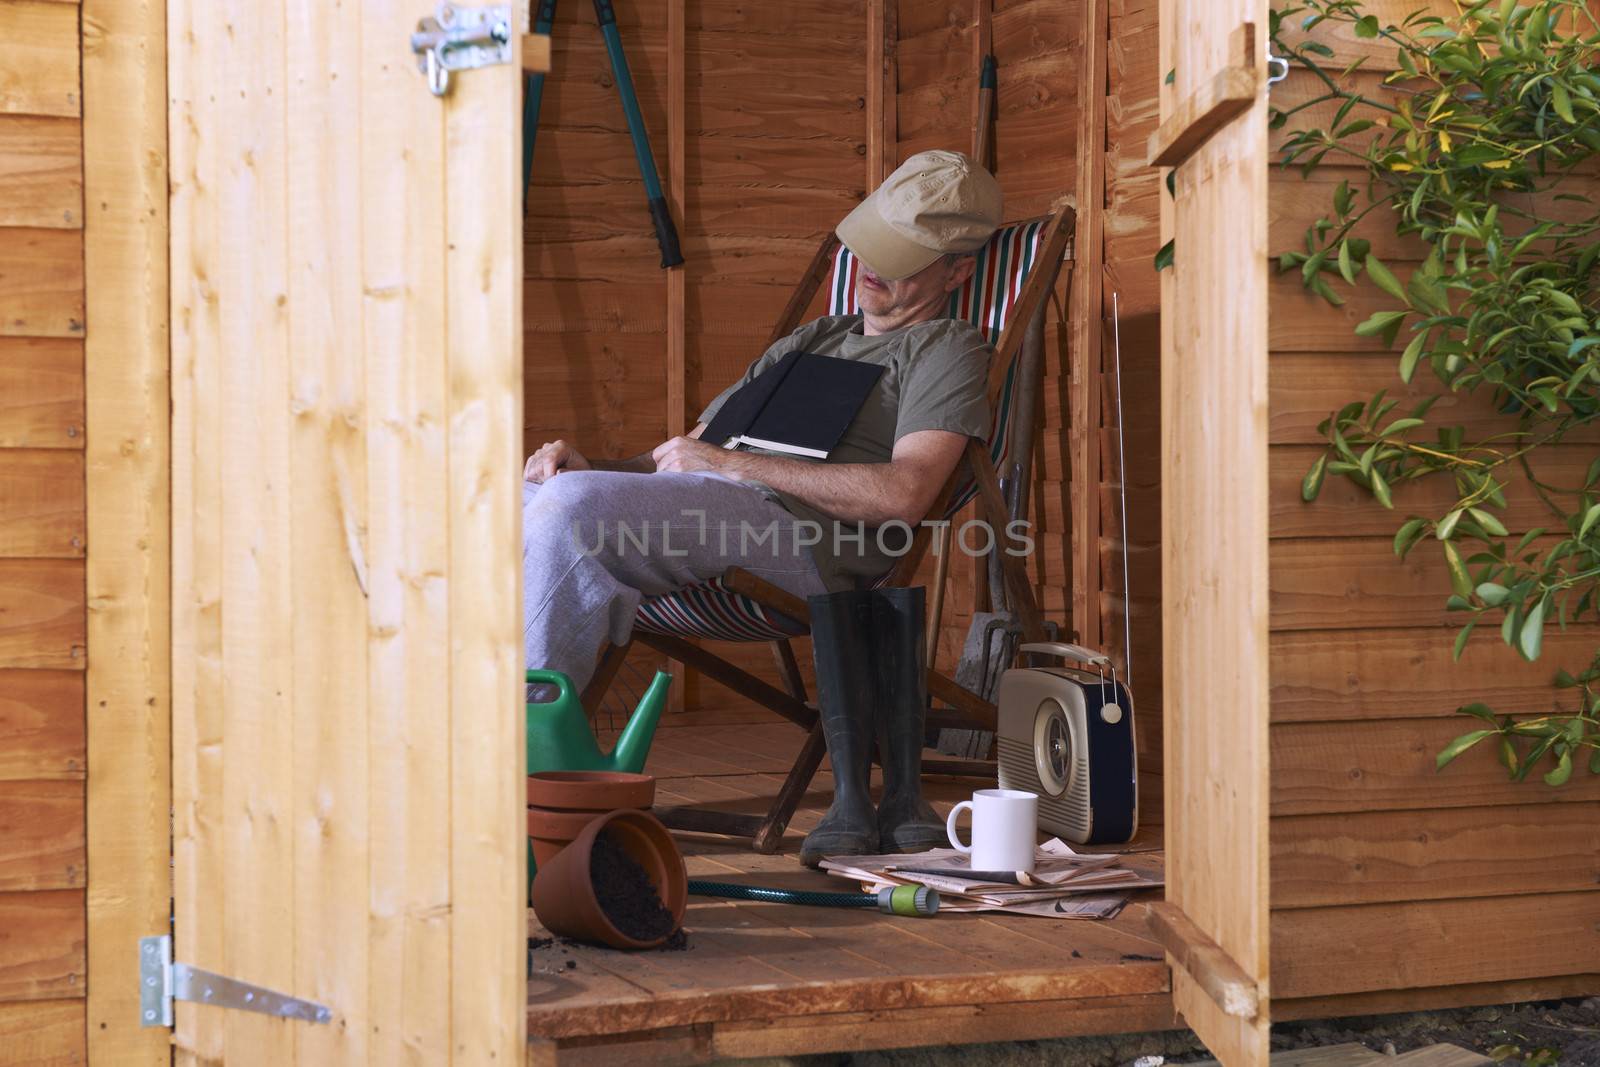 Asleep in shed by gemphotography